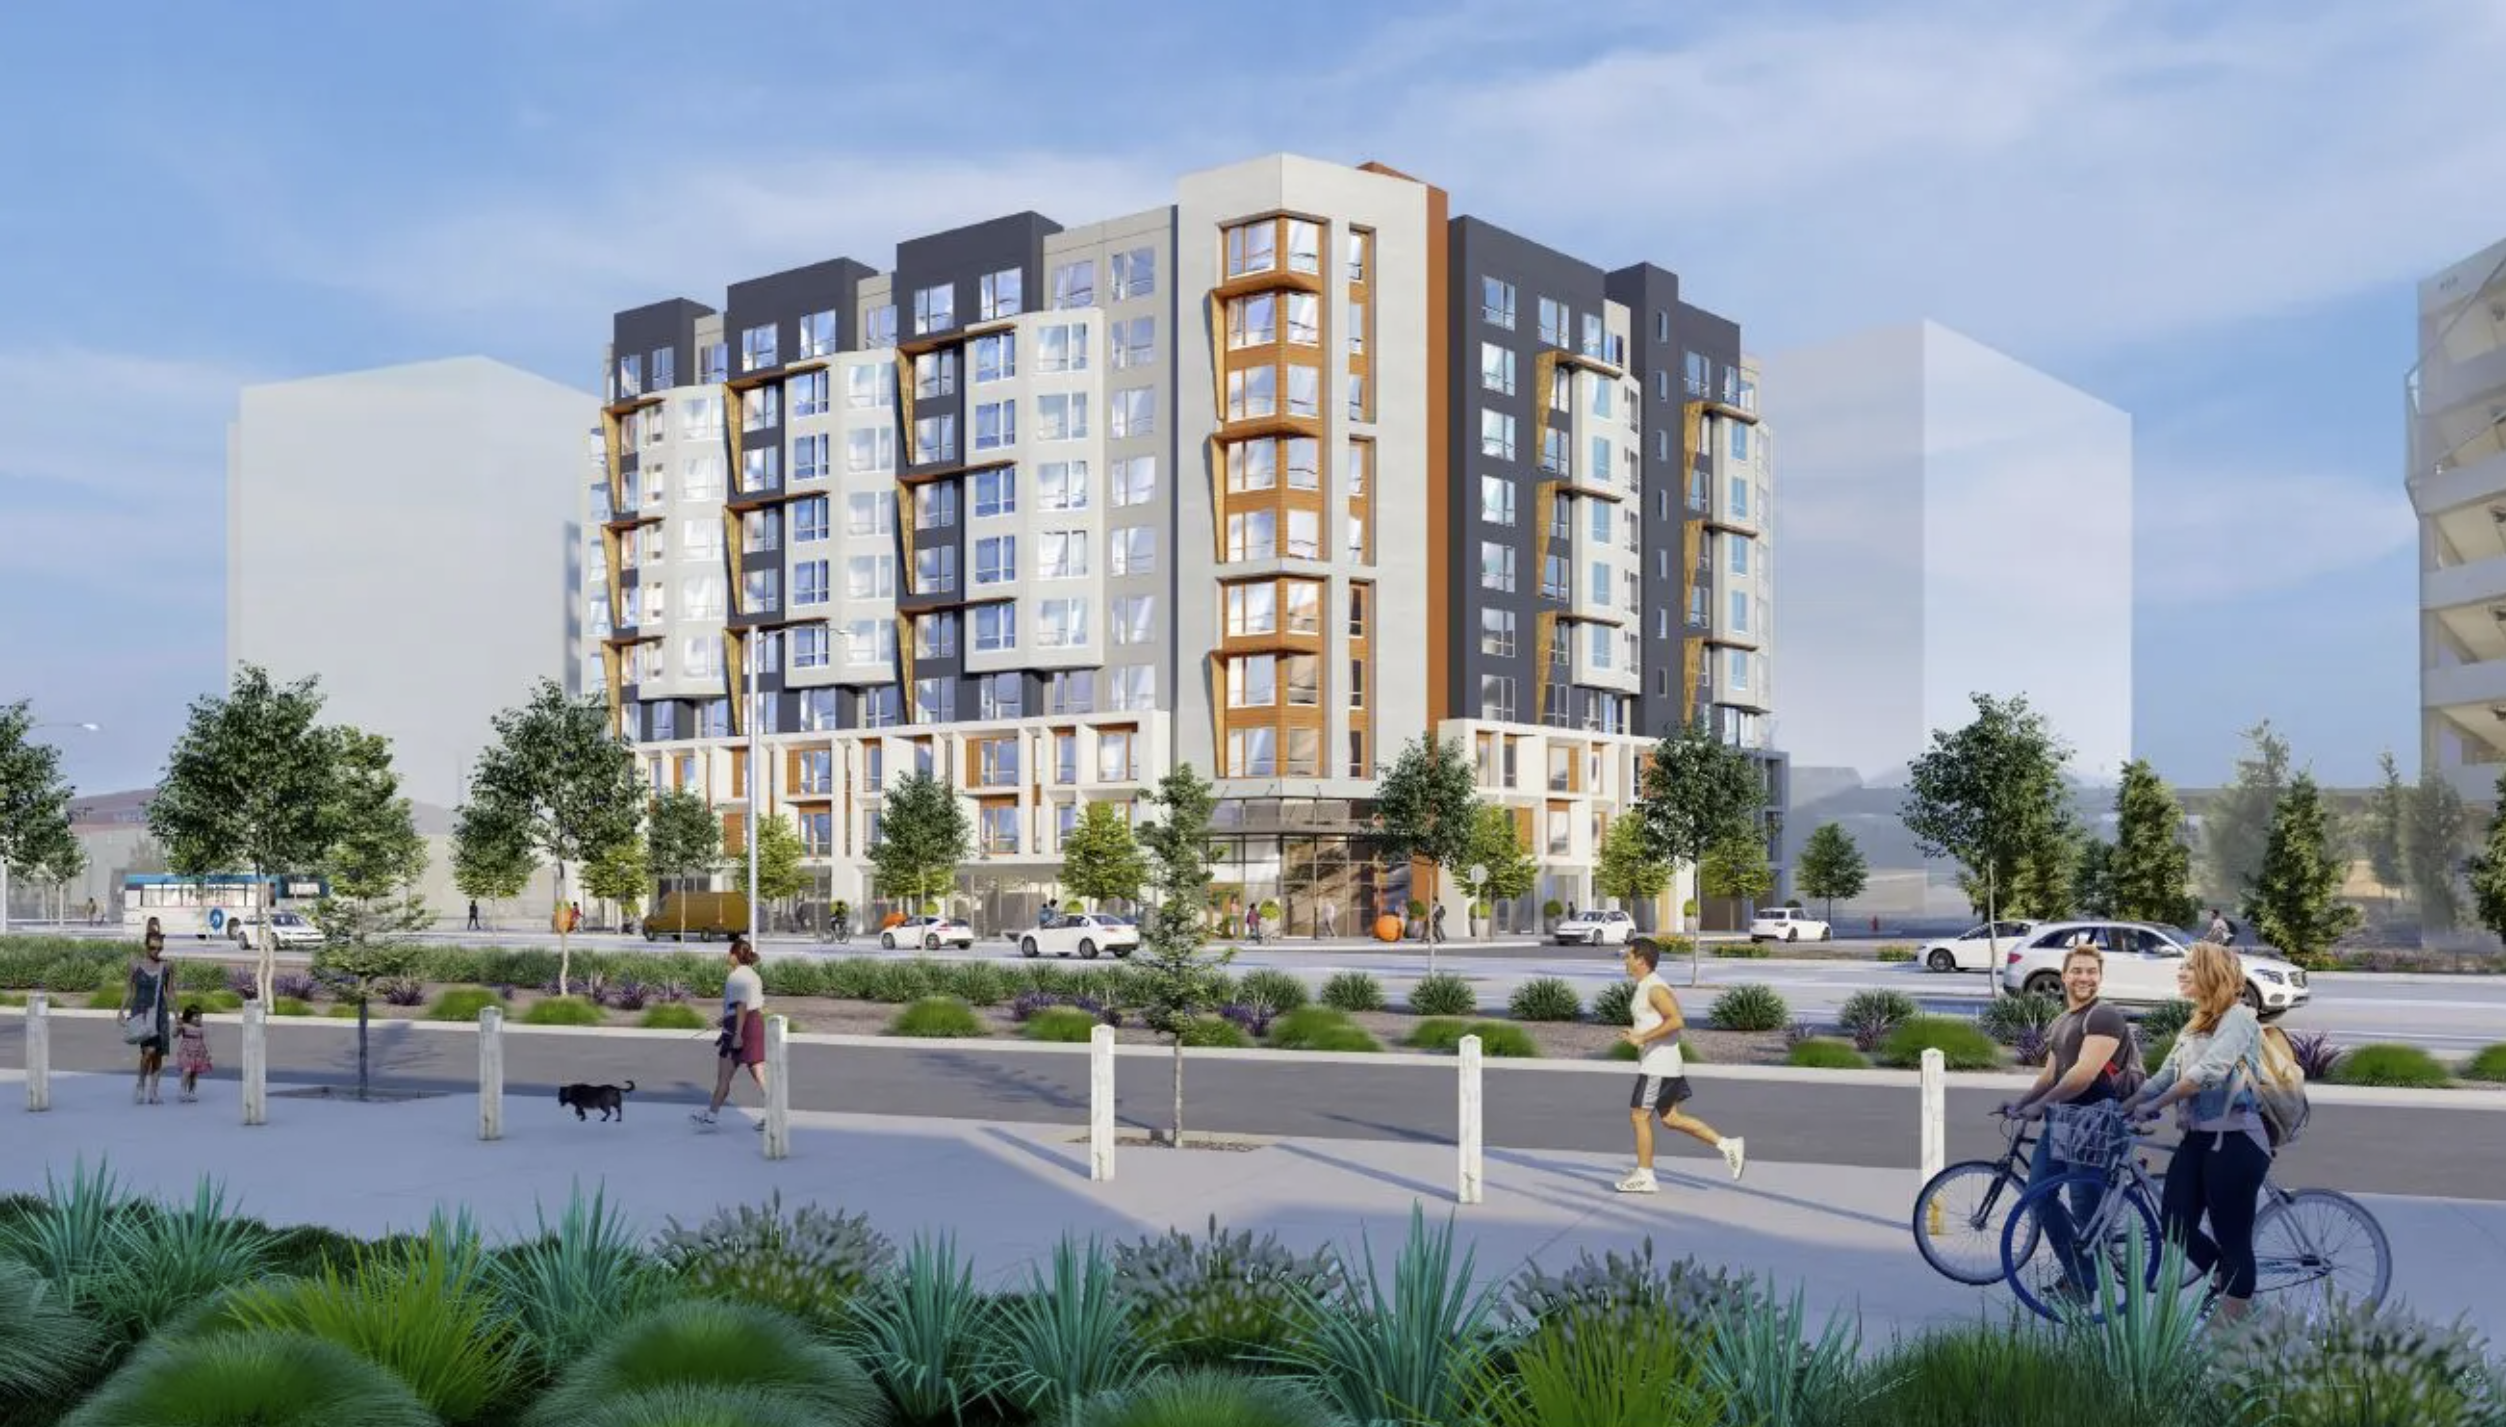 Berryessa Apartments render with pedestrians walking and riding bicycles